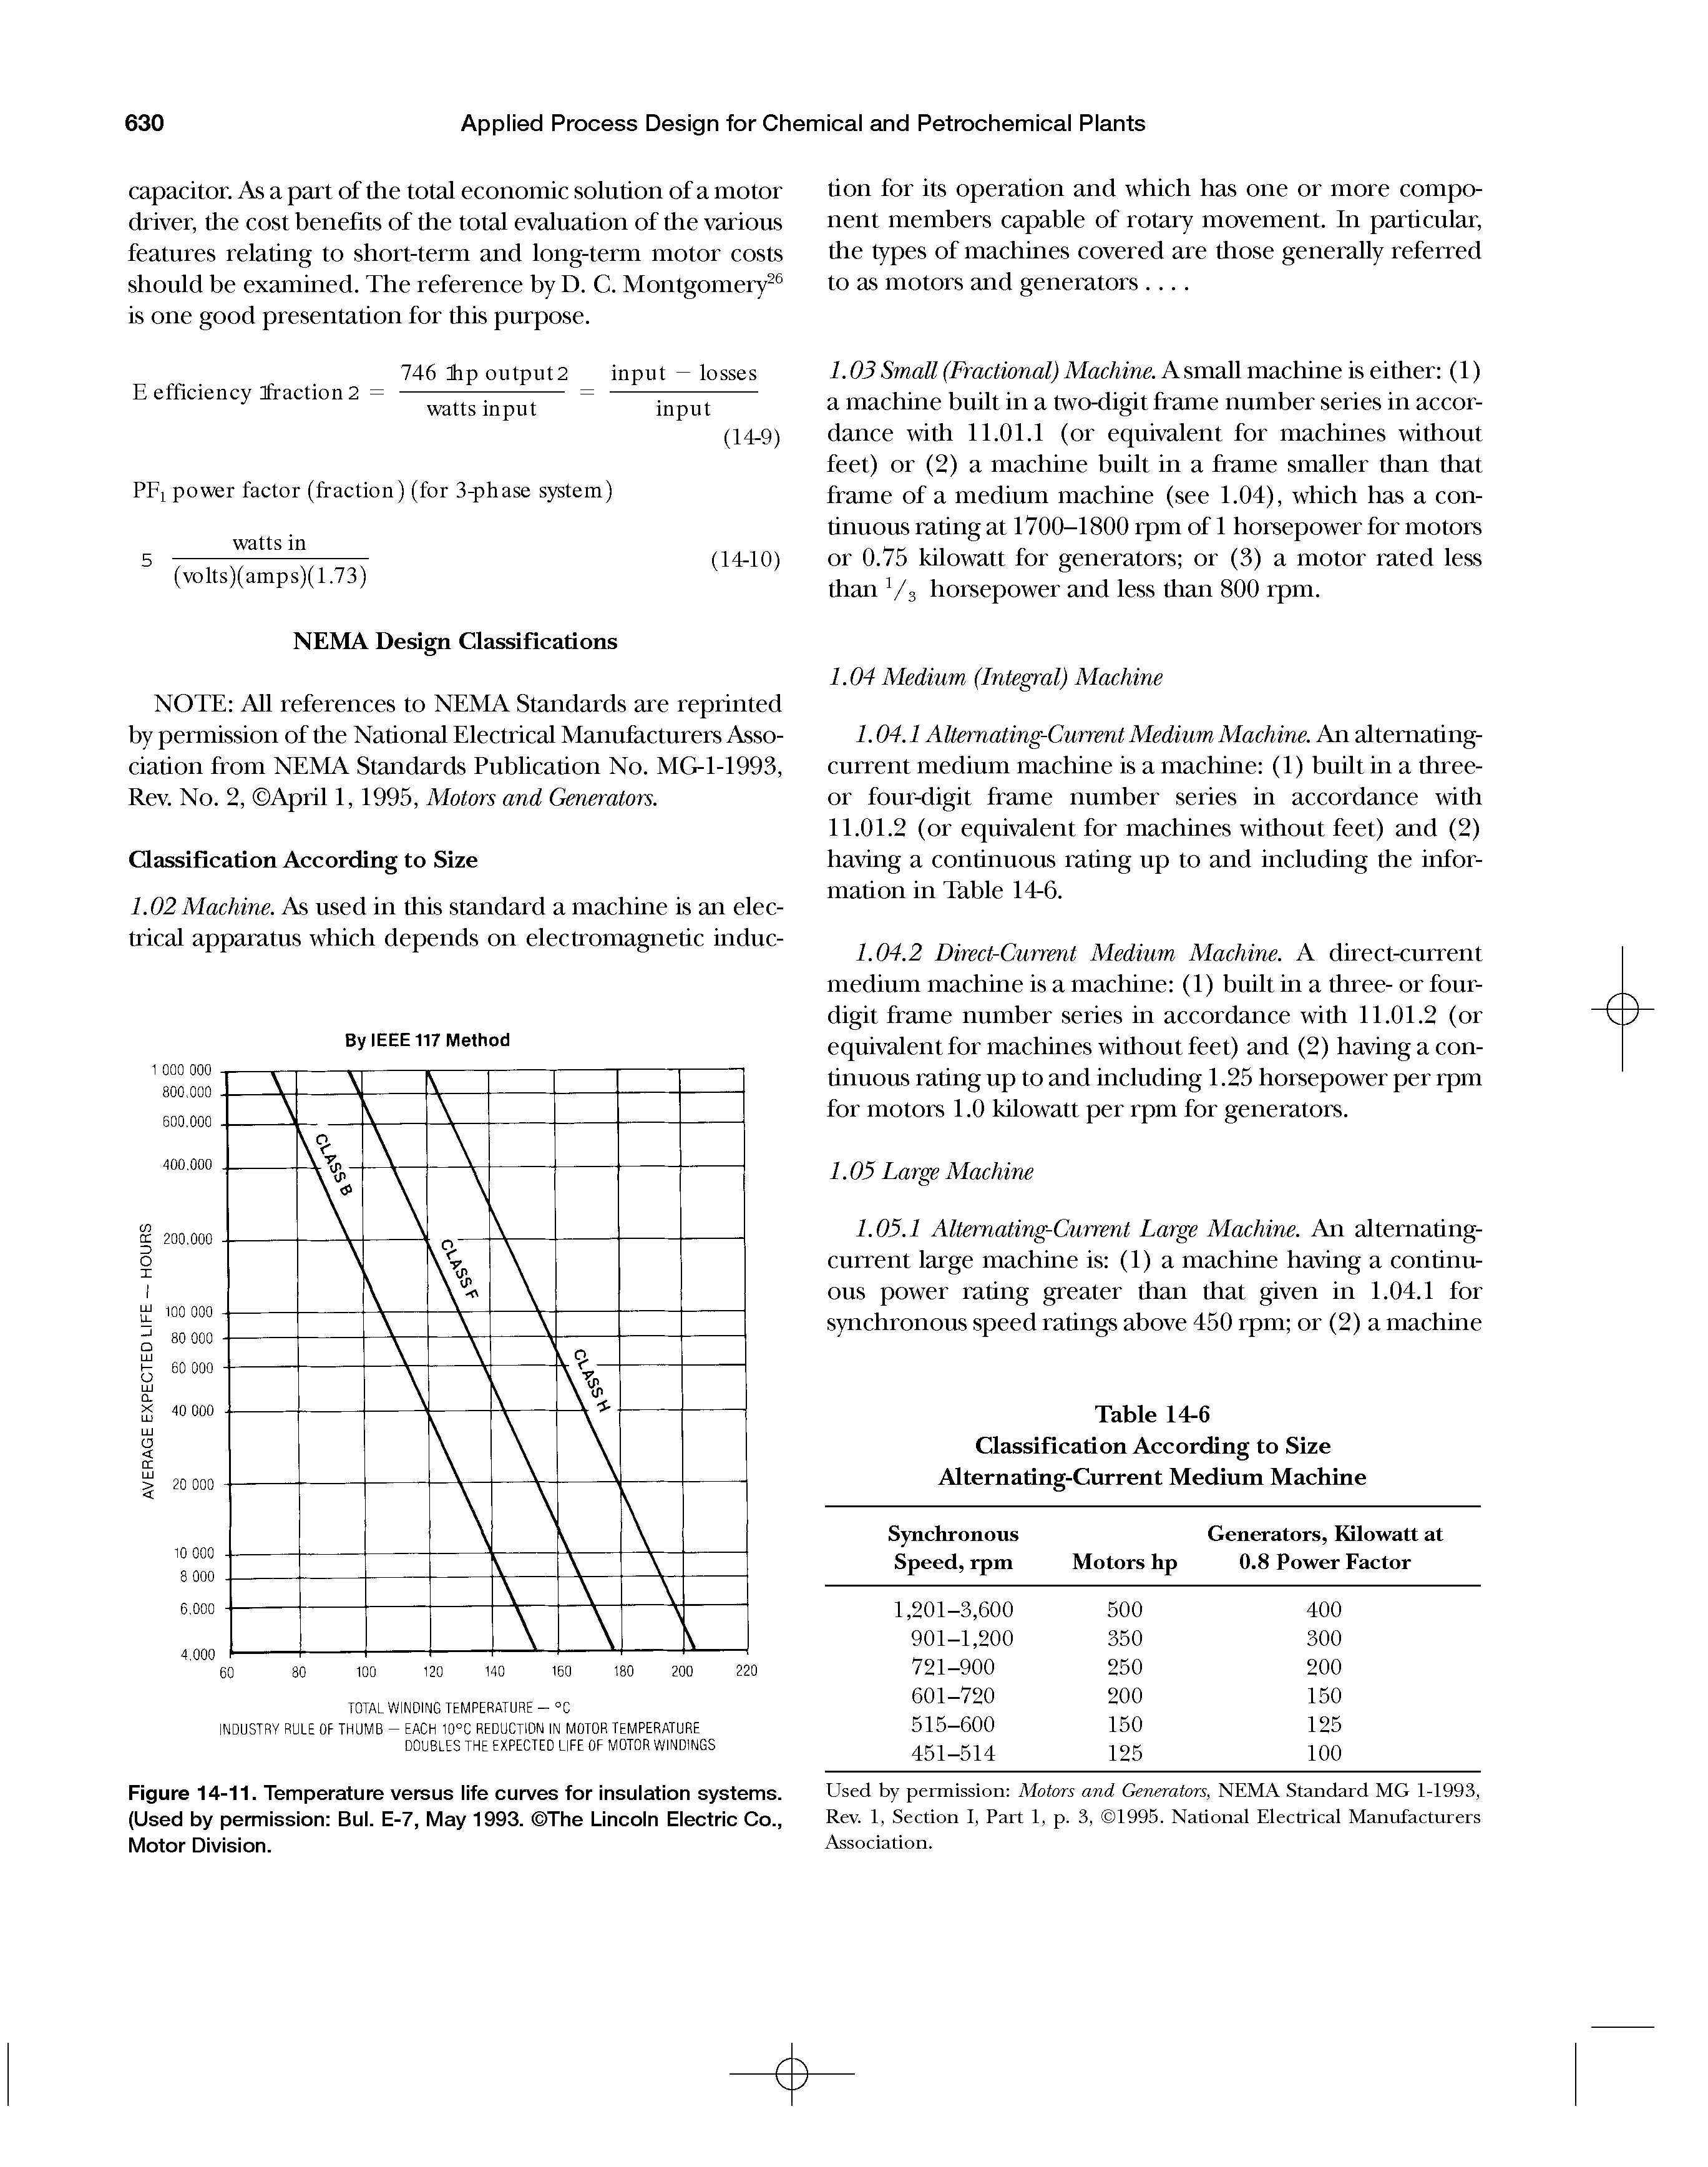 Figure 14-11. Temperature versus life curves for insulation systems. (Used by permission Bui. E-7, May 1993. The Lincoln Electric Co., Motor Division.